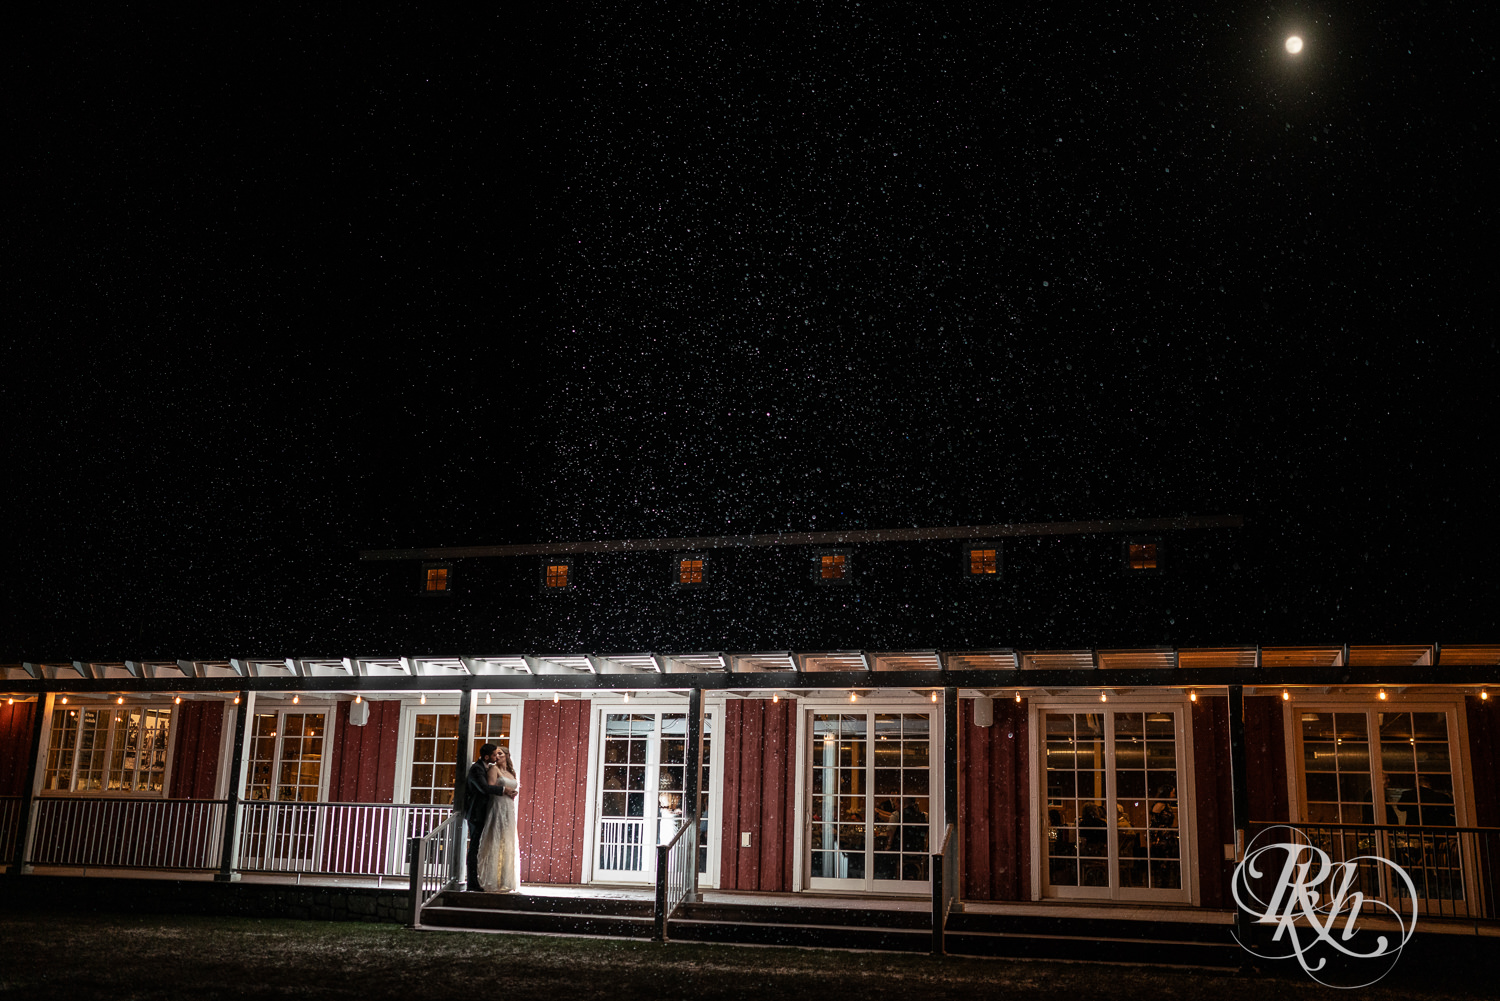 Bride and groom kiss at night in the falling snow at winter wedding at Almquist Farm in Hastings, Minnesota.